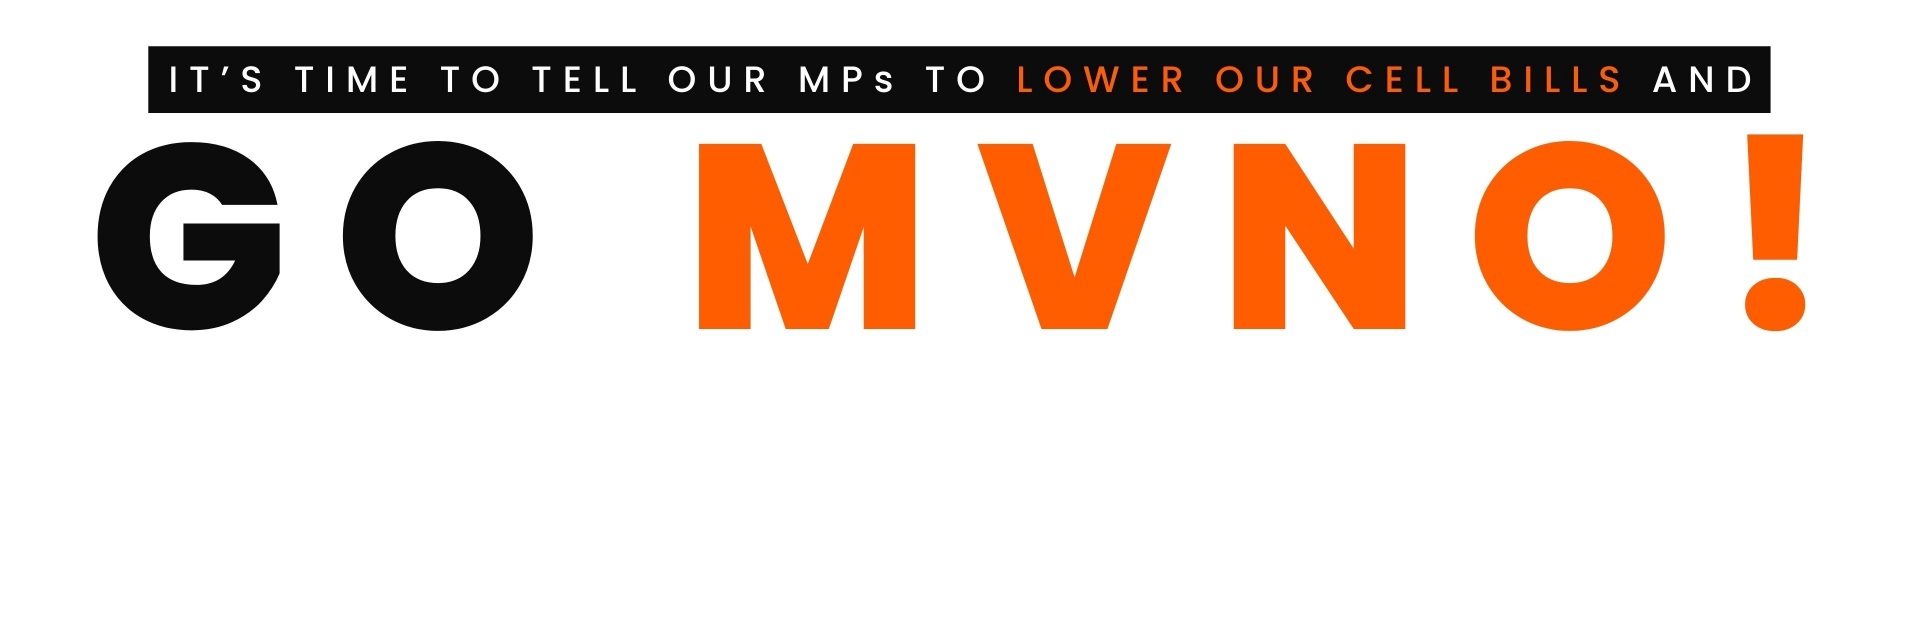 Tell the gov: For low cell phone prices, go MVNO!